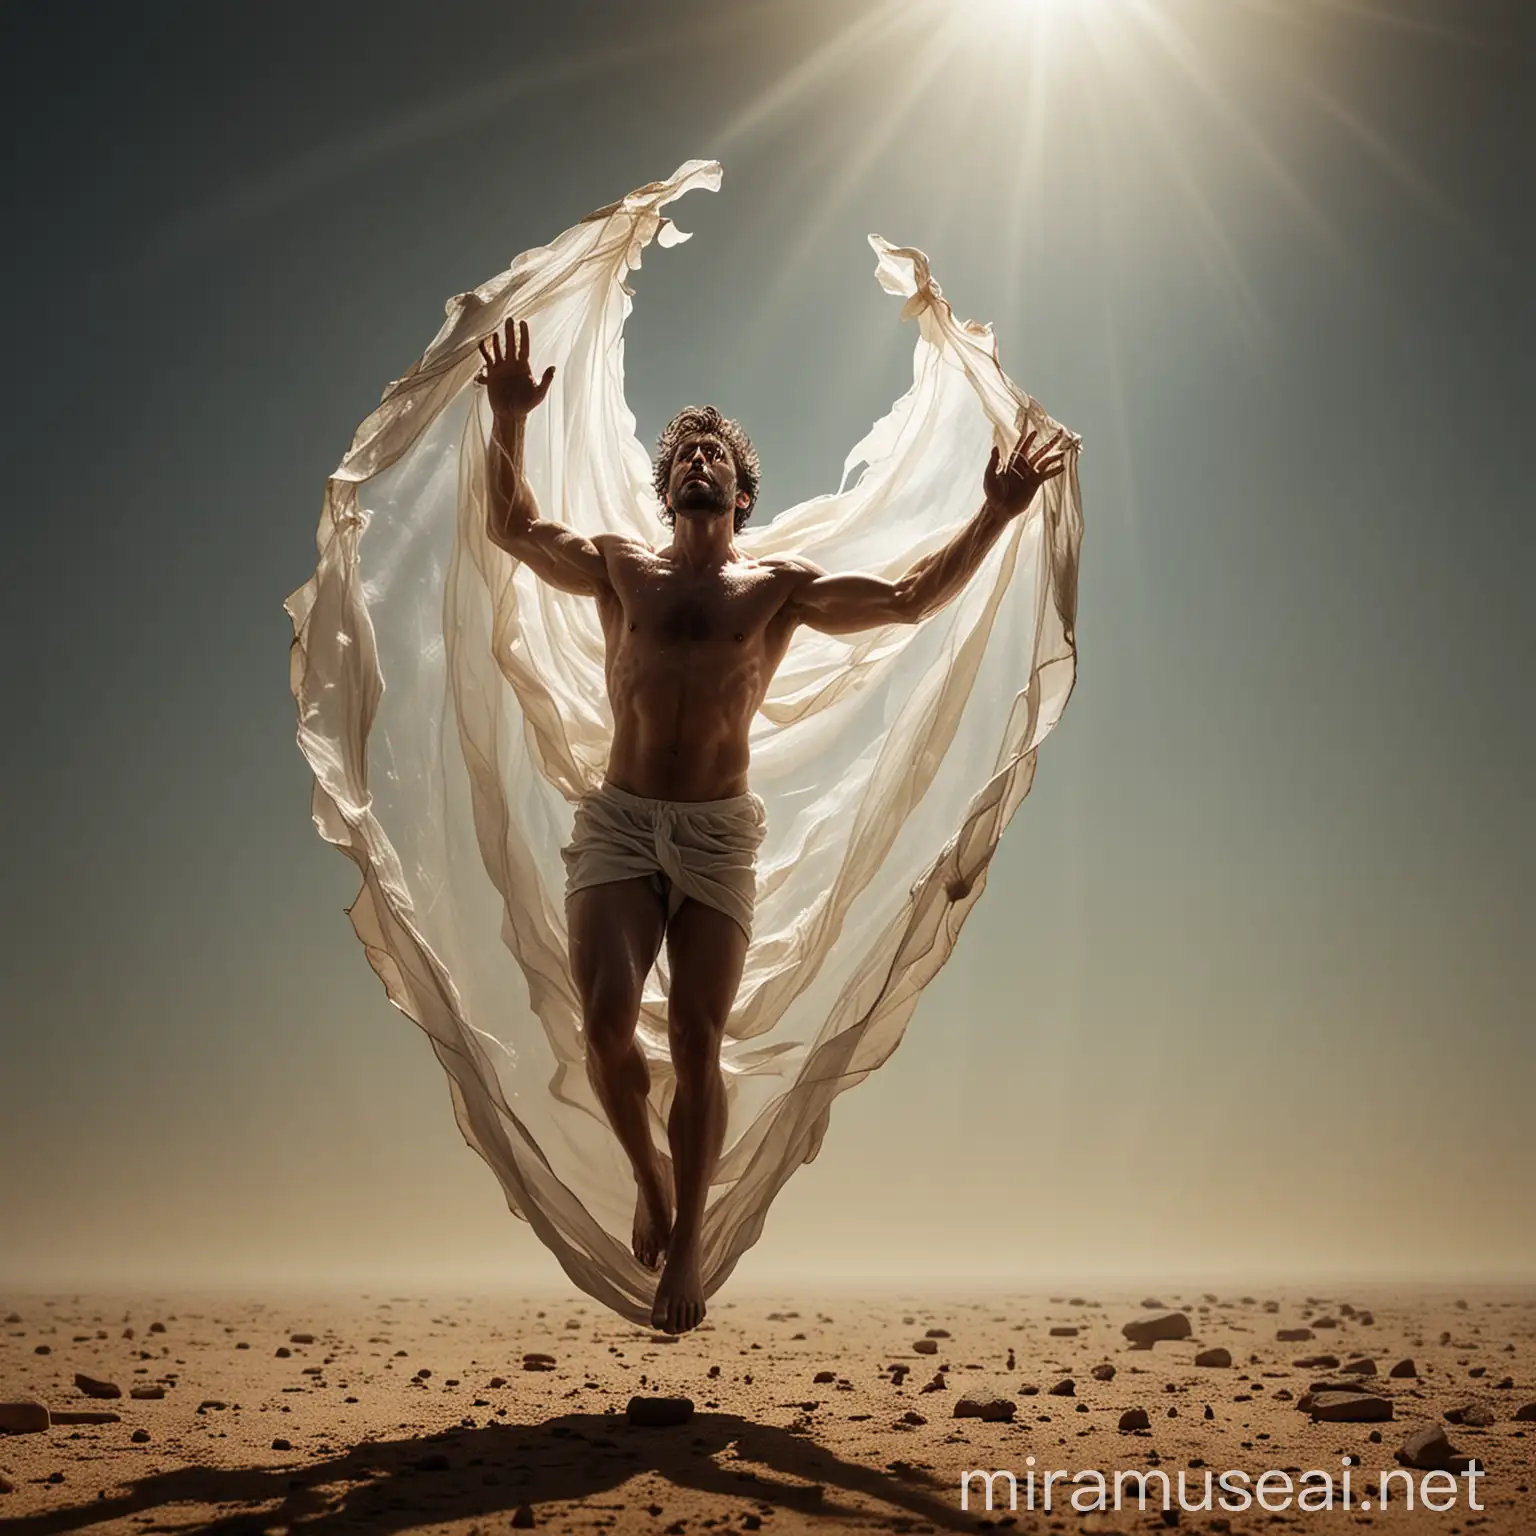 /imagine A man emerging from a semi-transparent cocoon, symbolizing transformation and recovery from addiction. The cocoon is suspended in mid-air, with delicate, fibrous textures that make it look both fragile and resilient. Inside the cocoon, the man's silhouette is visible, showing his determined effort to break free. His hands, adorned with scars of struggle, are reaching towards the light, fingertips almost grazing the edge of freedom. One foot has already broken free, its toes curling in anticipation on the edge of the cocoon's surface. His body is in a dynamic pose, leaning forward with a sense of urgency and momentum. His face is a mix of concentration and hope, eyes fixed on the bright horizon of possibility. The scene is illuminated with dramatic, directional lighting coming from the top right corner, casting strong, dynamic shadows and highlighting the man's form and wings. Use a hyper-realistic style with detailed textures and vibrant colors. The overall composition should evoke a sense of rebirth, hope, and liberation. Add a cinematic feel with a slight vignette effect to draw focus on the man and the cocoon. Ensure the aspect ratio is 16:9 for a widescreen presentation. --v 5 --ar 16:9 --q 2 --hd